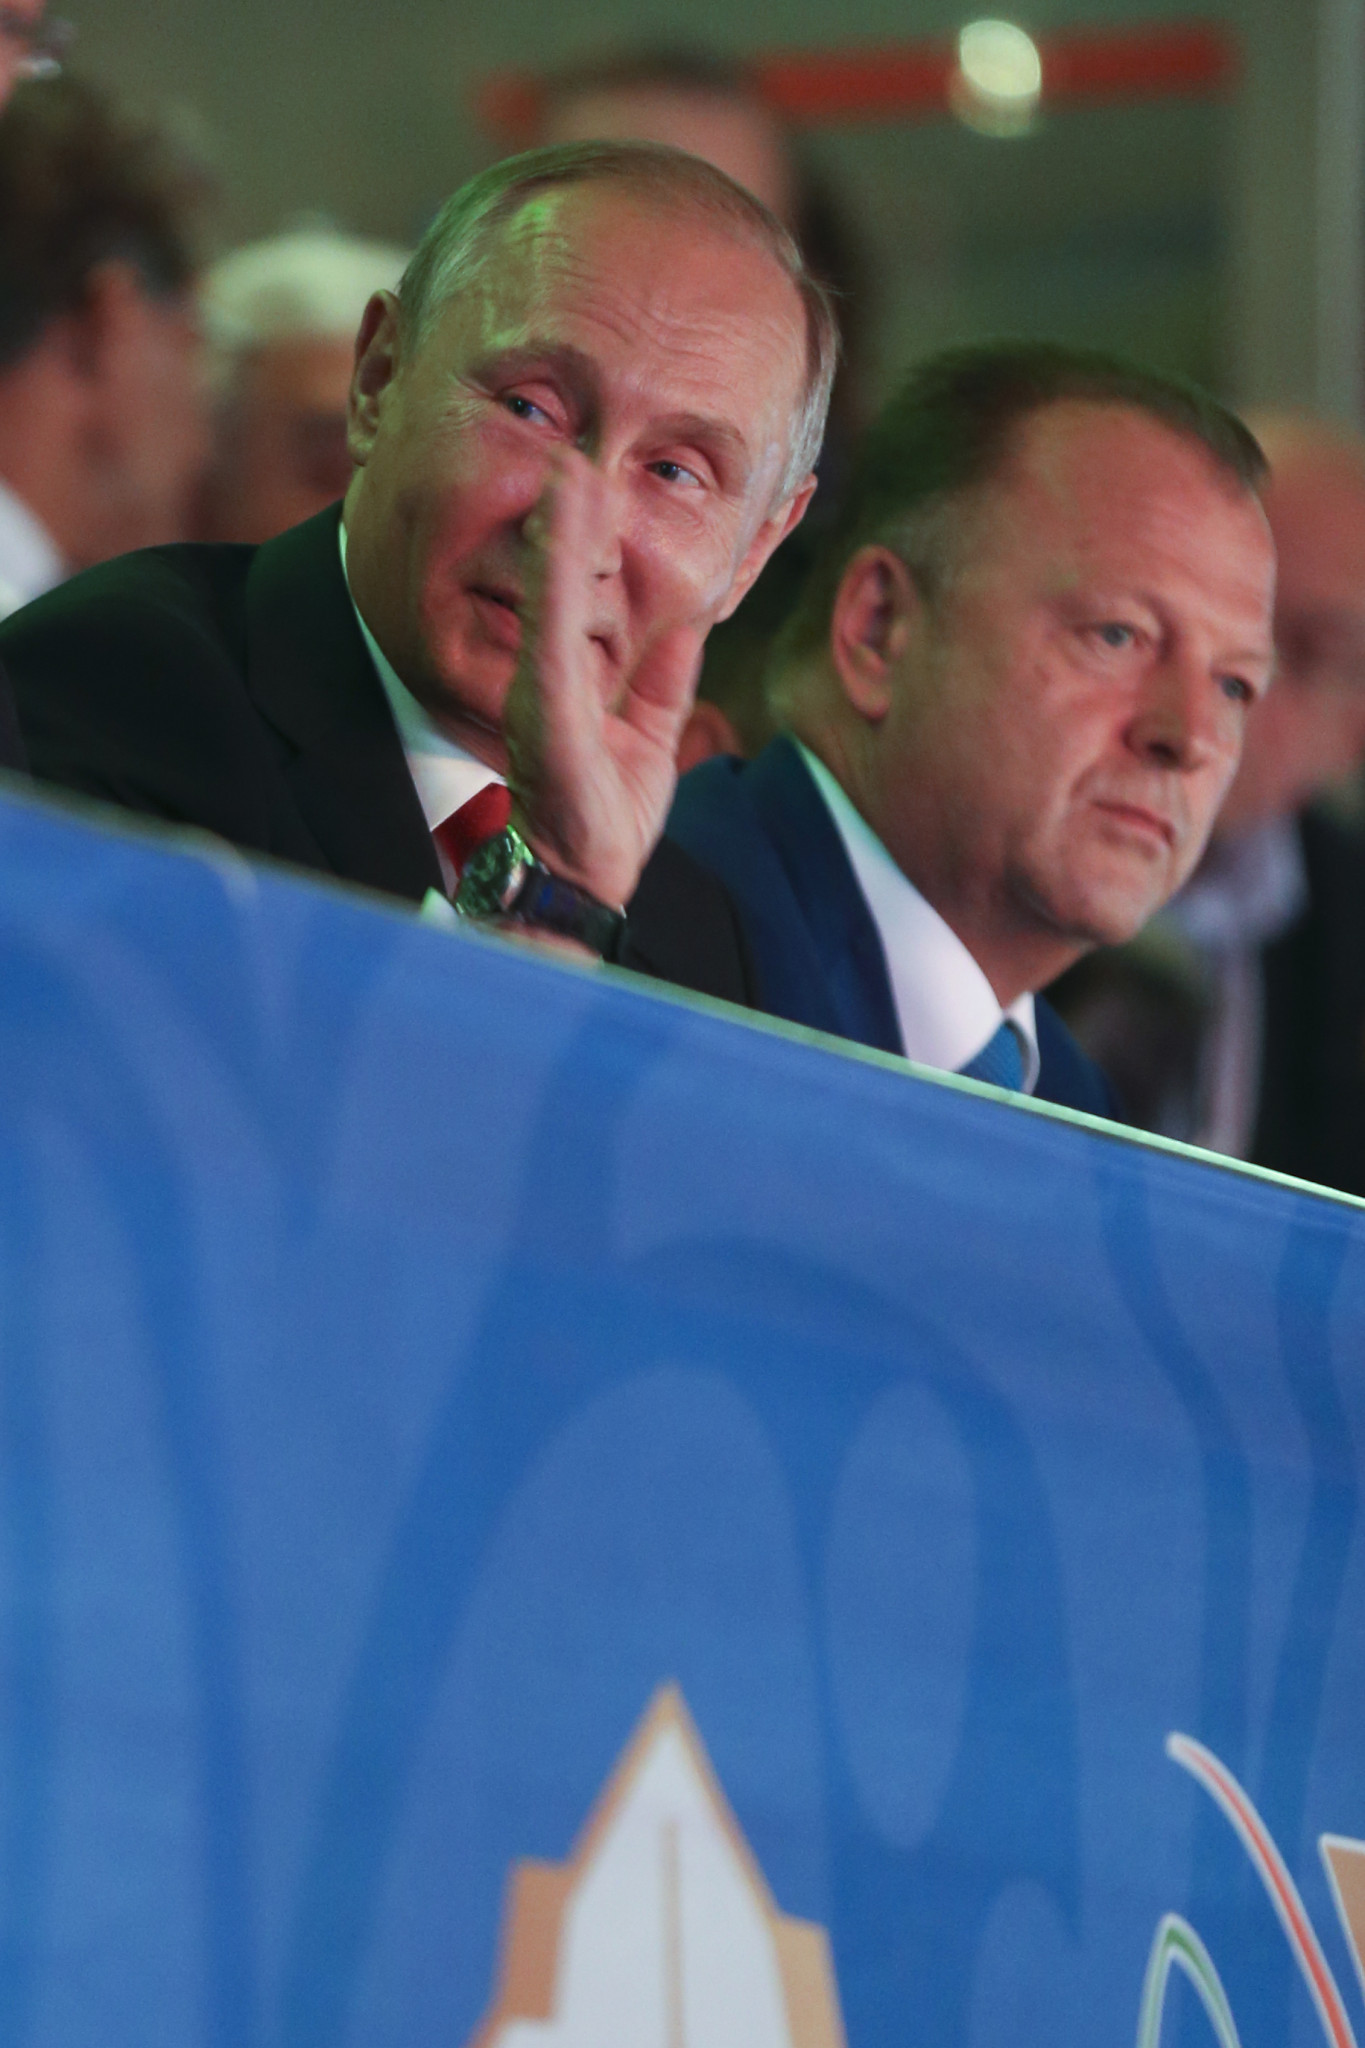 Russian President Vladimir Putin, left, waves next to Marius Vizer, head of the International Judo Federation, right, during the World Championships in Budapest ©Getty Images